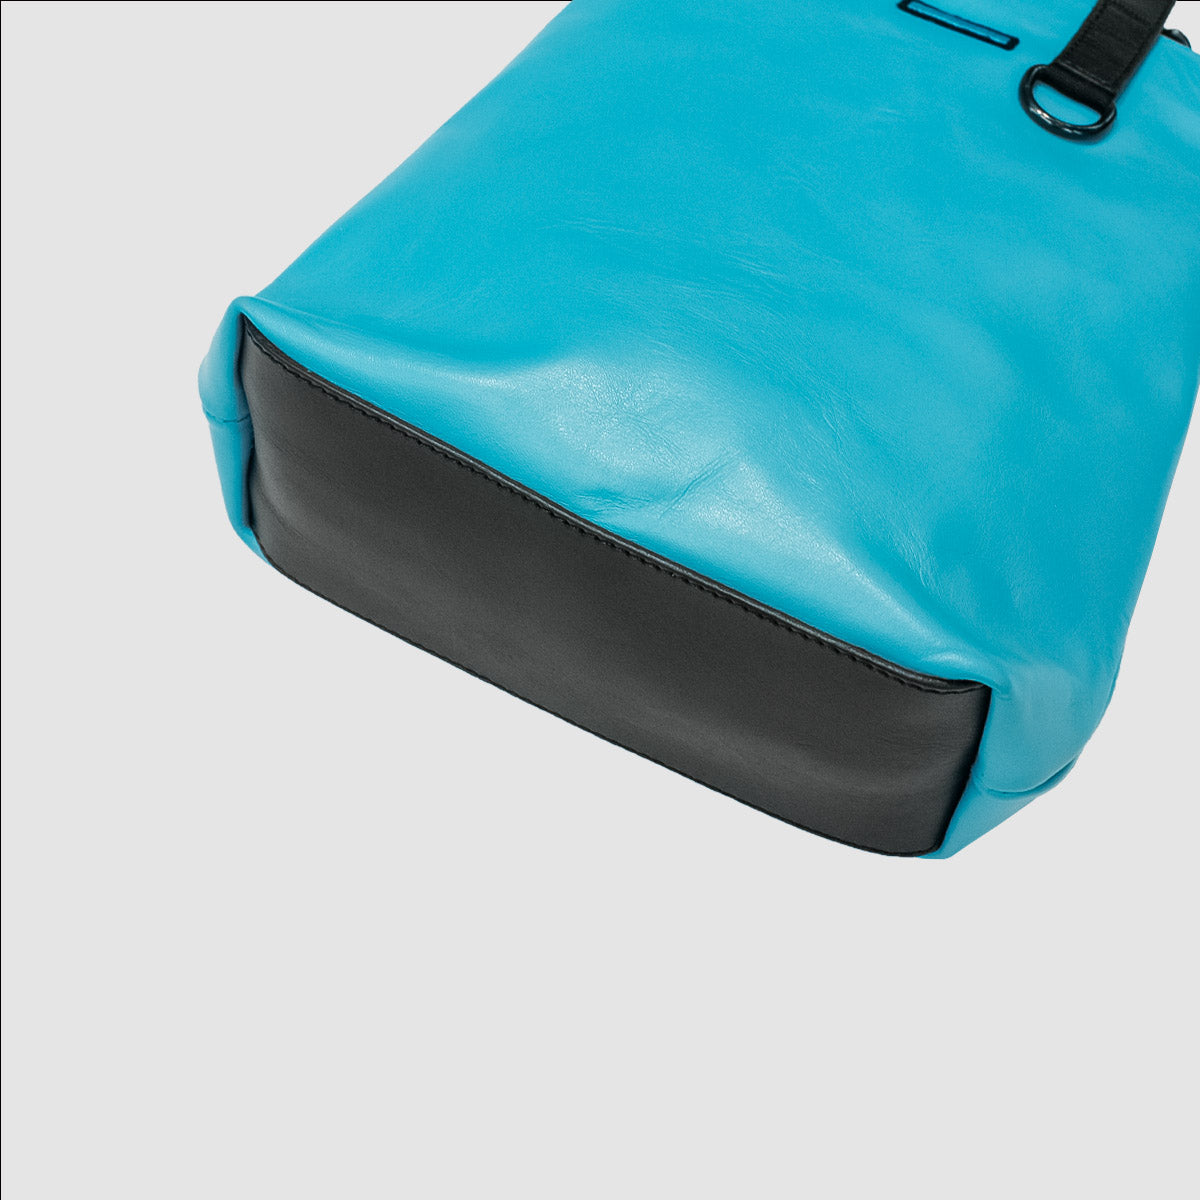 MUZE TURQUOISE LABEL - LEATHER SHOULDER BAG  "Teddy"  (TURQUOISE) ミューズ レザー ショルダーバッグ "テディ” ターコイズ